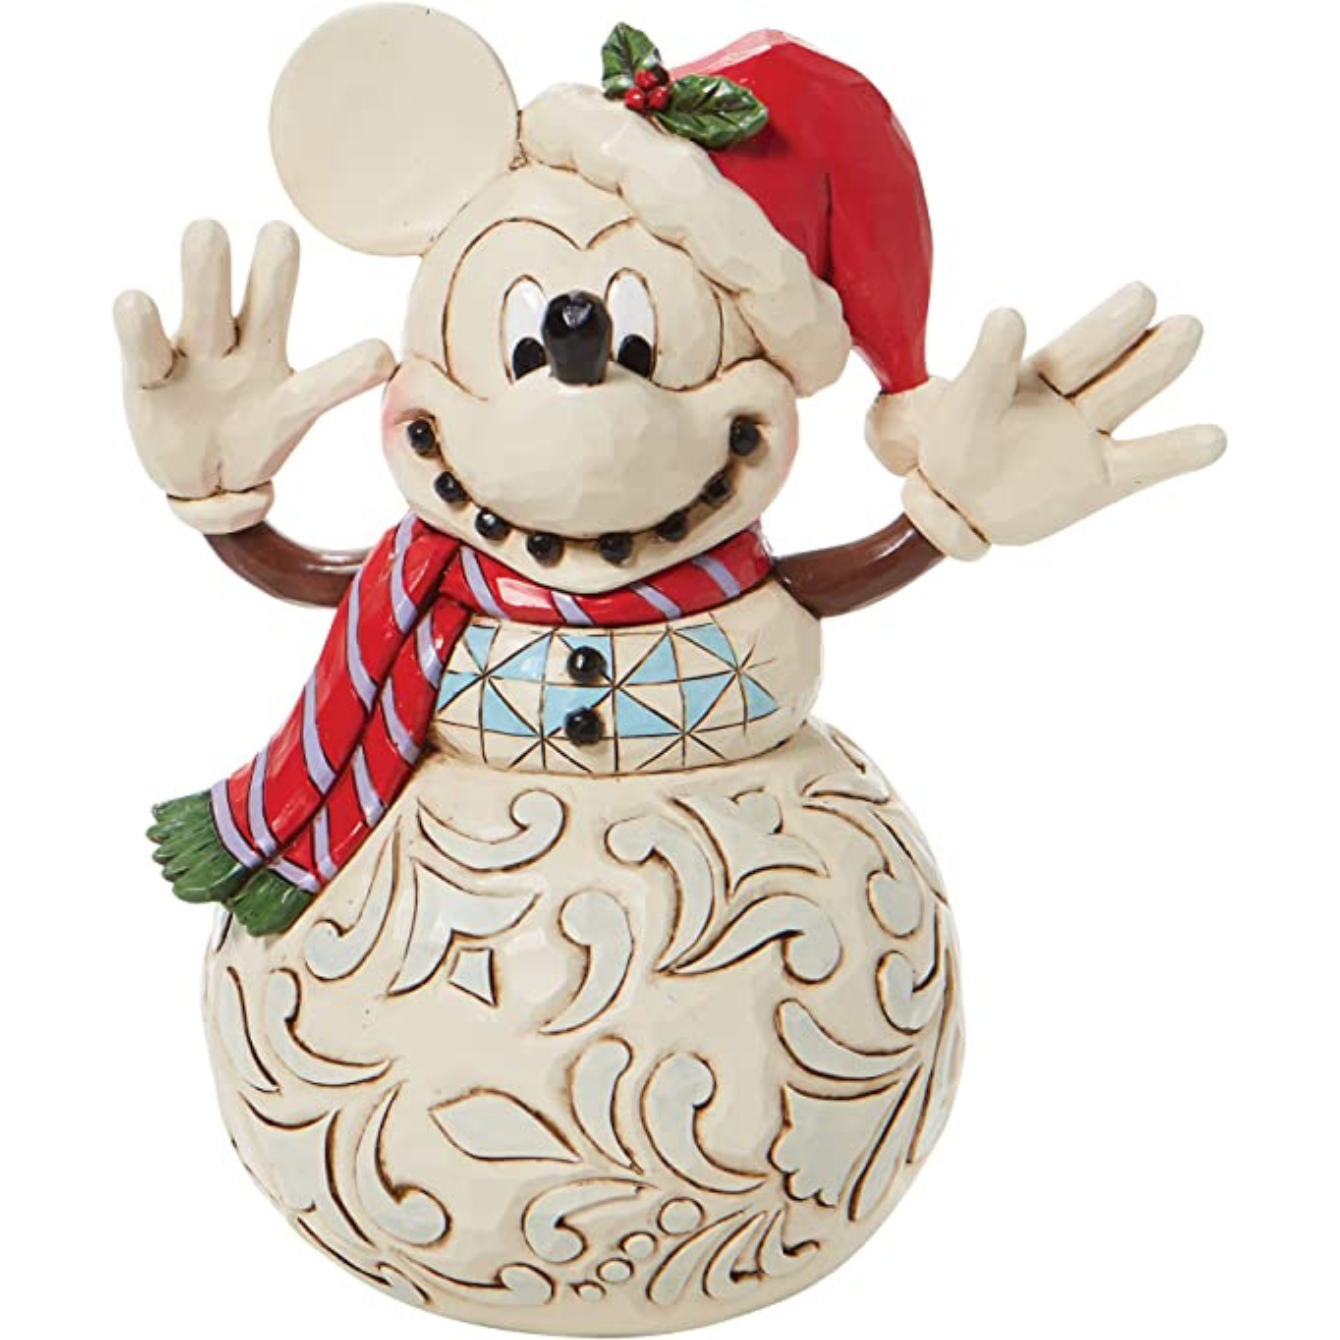 Enesco Disney Traditions by Jim Shore Mickey Mouse Snowman Snowy Smiles Figurine